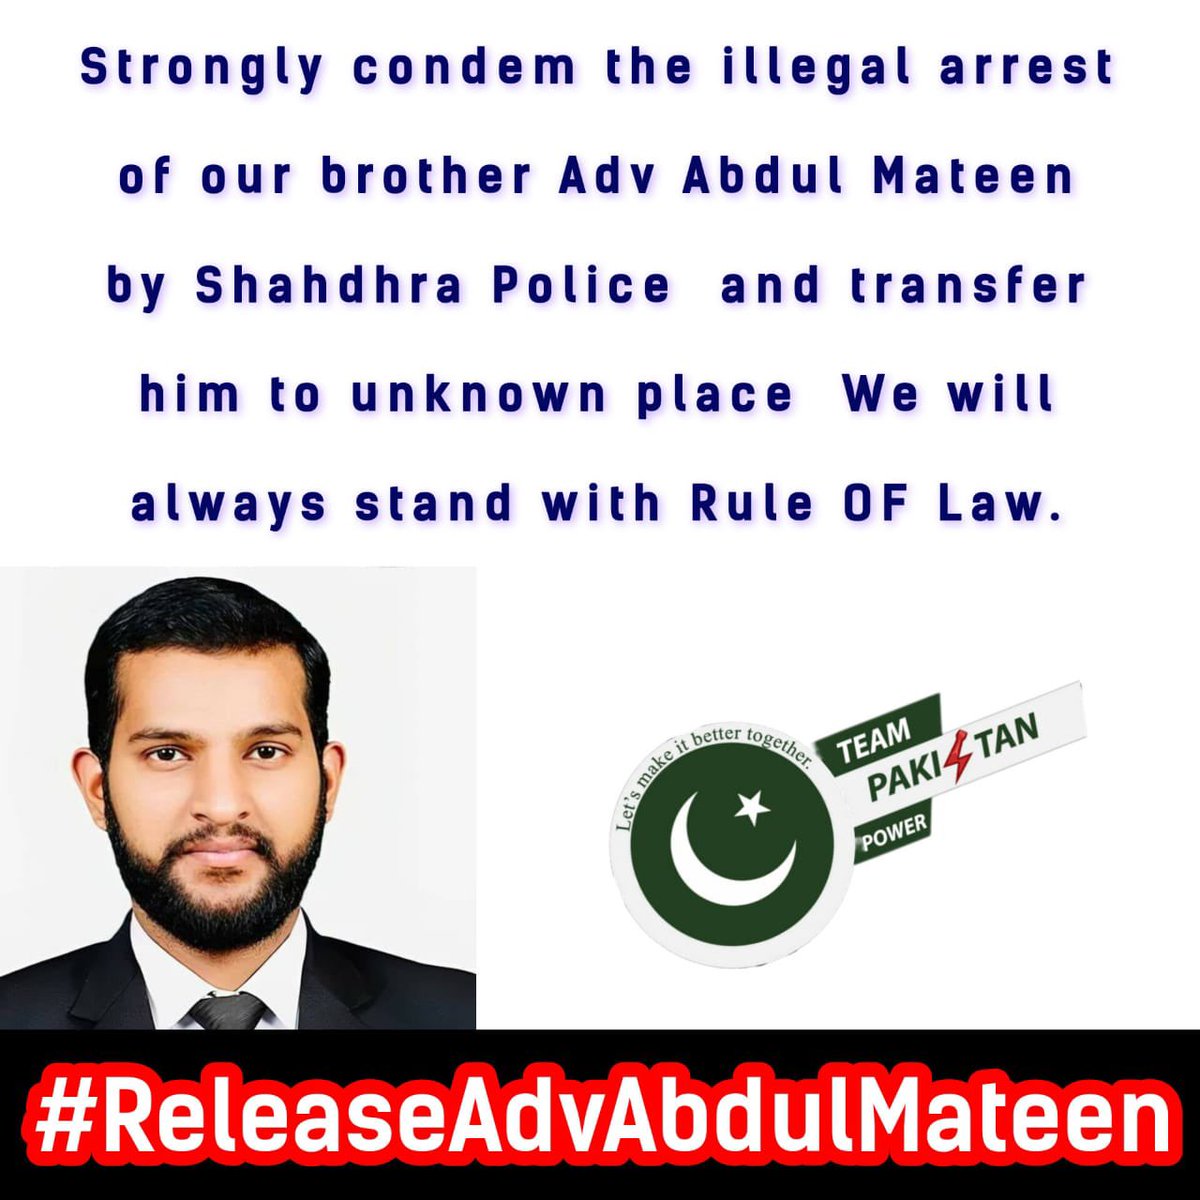 I.@tqb1468256 understand that Advocate Abdul Mateen's detention is a stark reminder of the importance of solidarity and advocacy. Let's raise our voice for #ReleaseAdvAbdulMateen @TeamPakPower